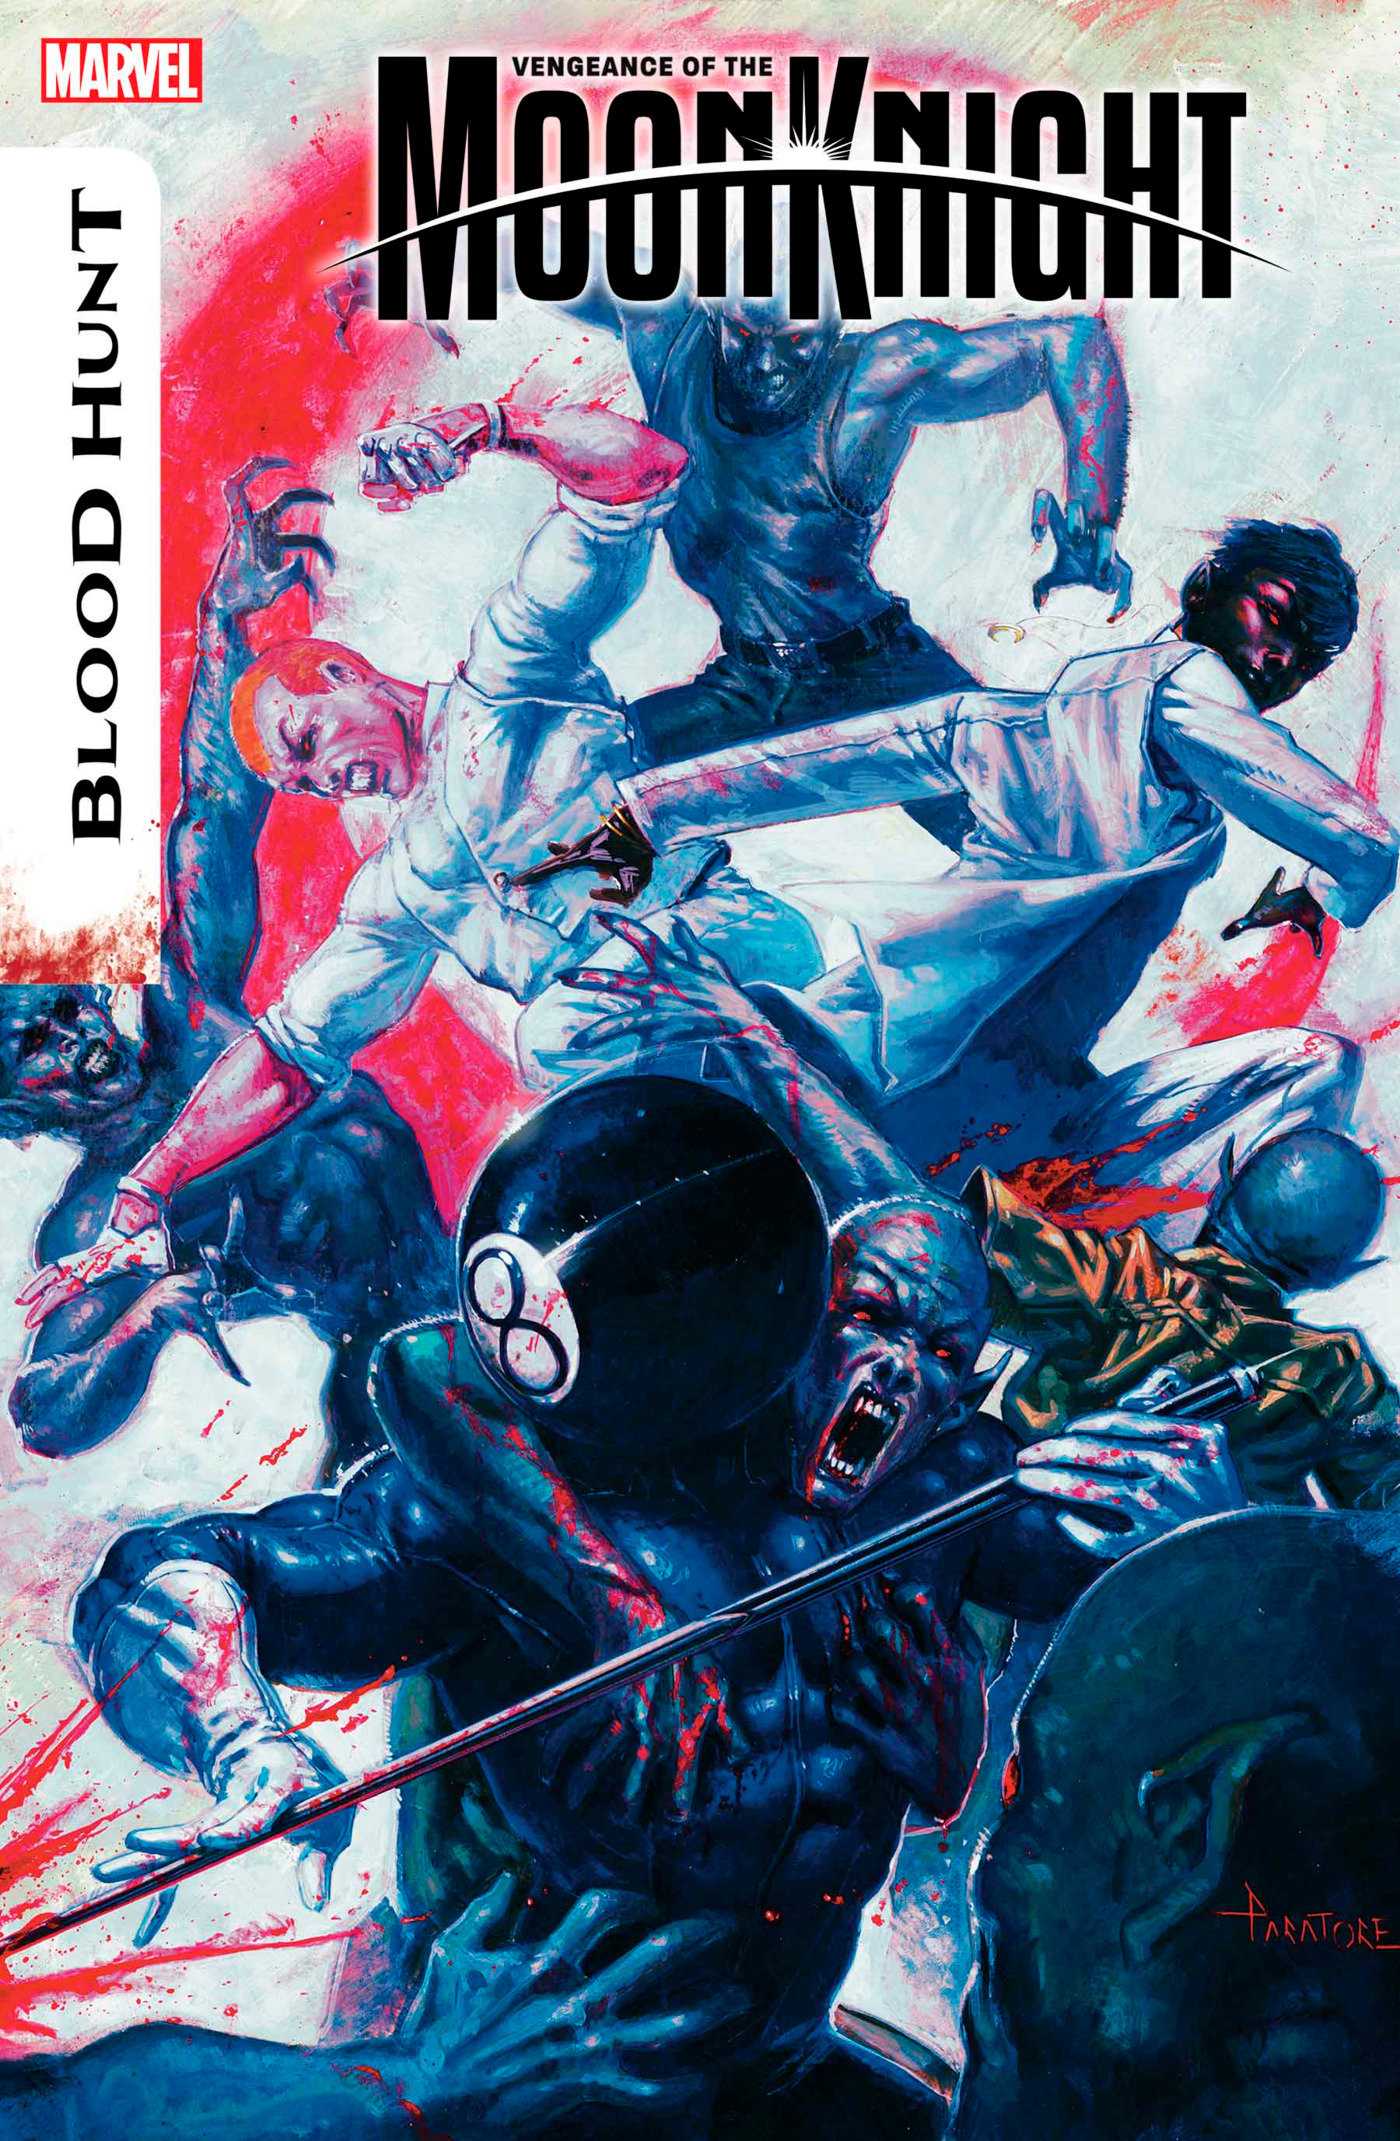 Vengeance of the Moon Knight #6 (Blood Hunt)